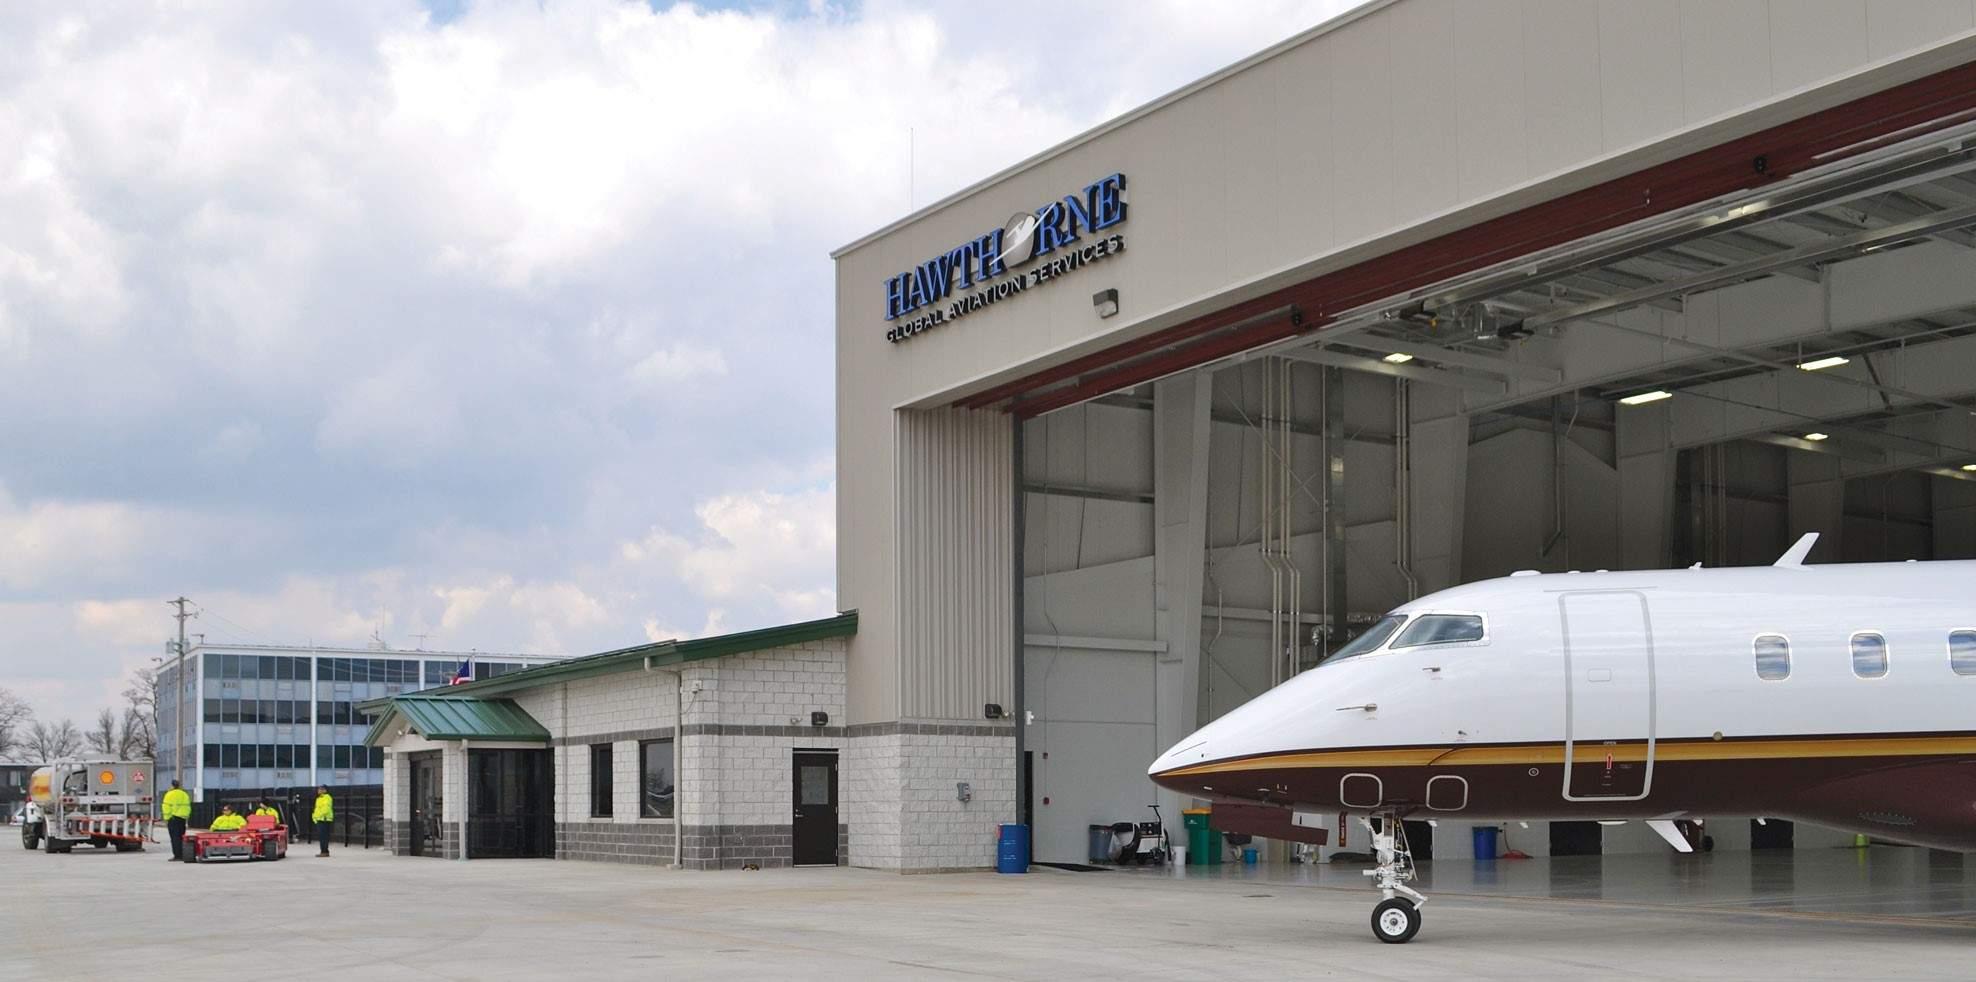 Hawthorne Global Aviation Services FBO consolidation move